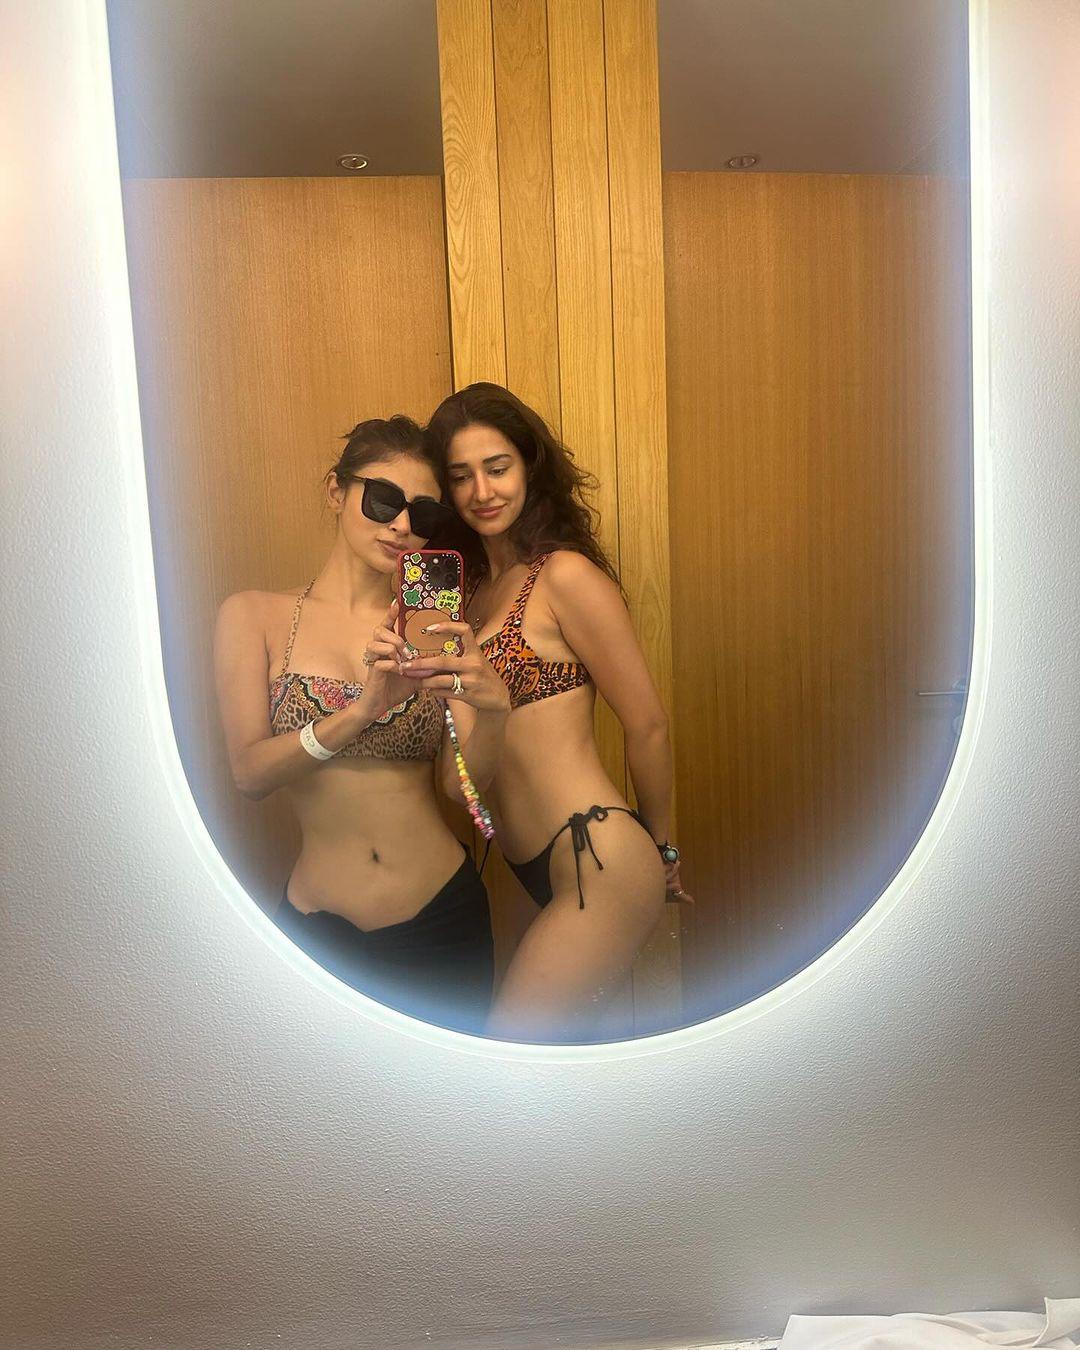 Mouni shared this mirror selfie where she posed with Disha in a swimsuit